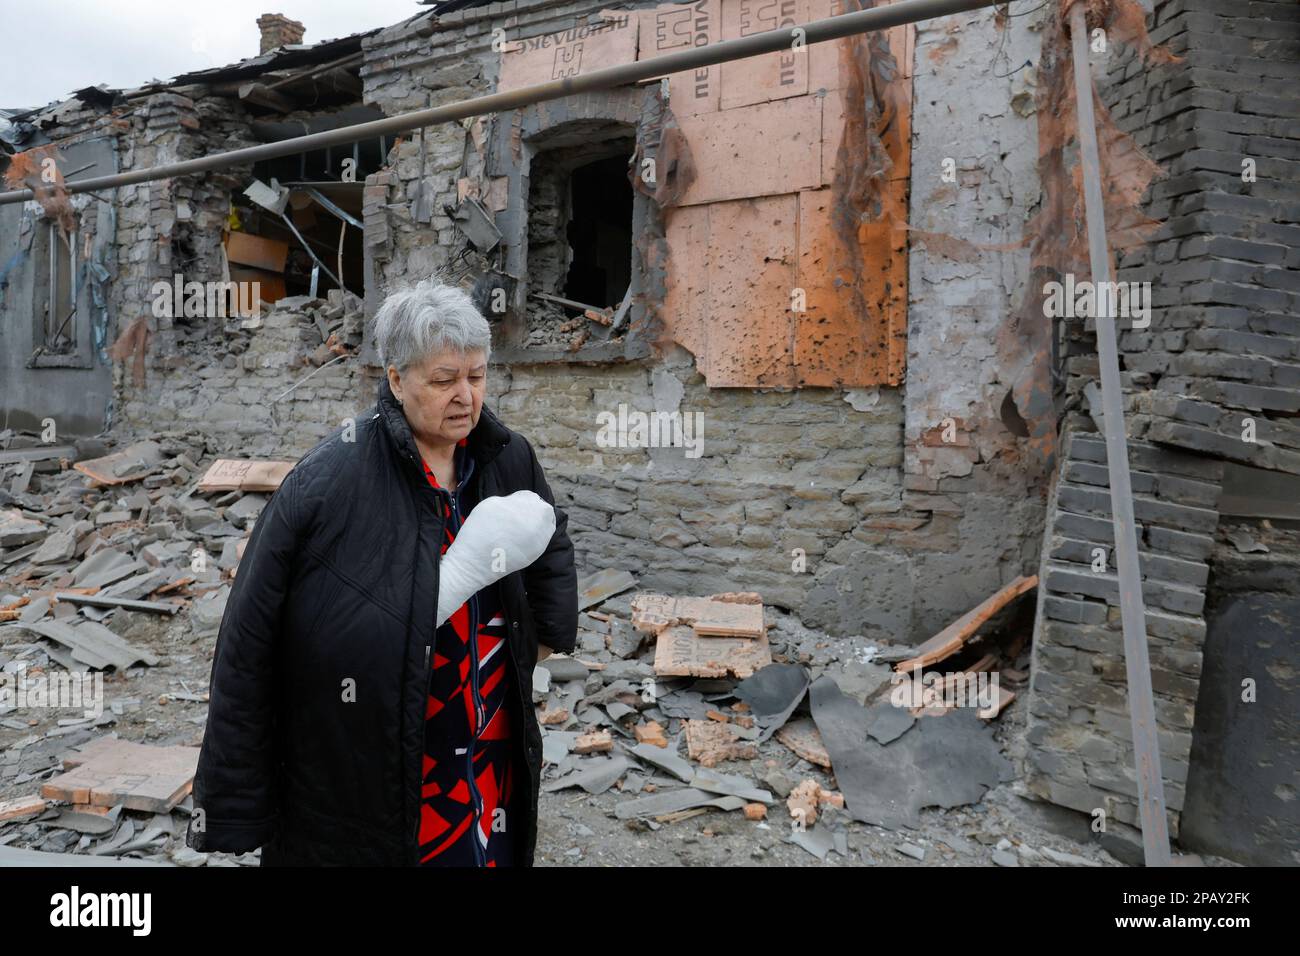 Local resident Svetlana Boiko, 66, who was injured in recent shelling, walks outside her destroyed house in the course of Russia-Ukraine conflict in Donetsk, Russian-controlled Ukraine, March 12, 2023. REUTERS/Alexander Ermochenko Stock Photo